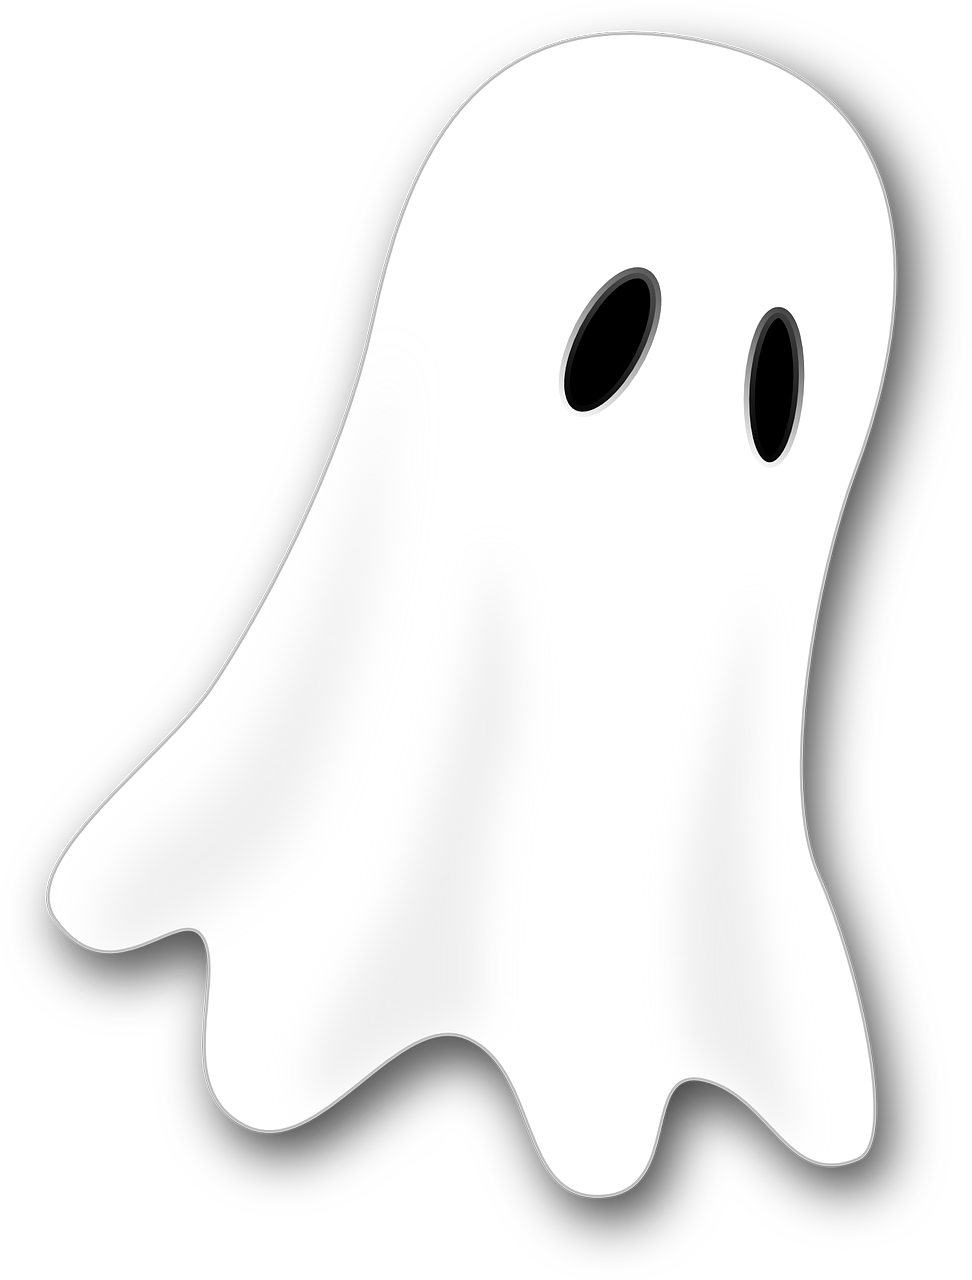 ghost-boo-halloween-spooky-haunted-free-image-from-needpix